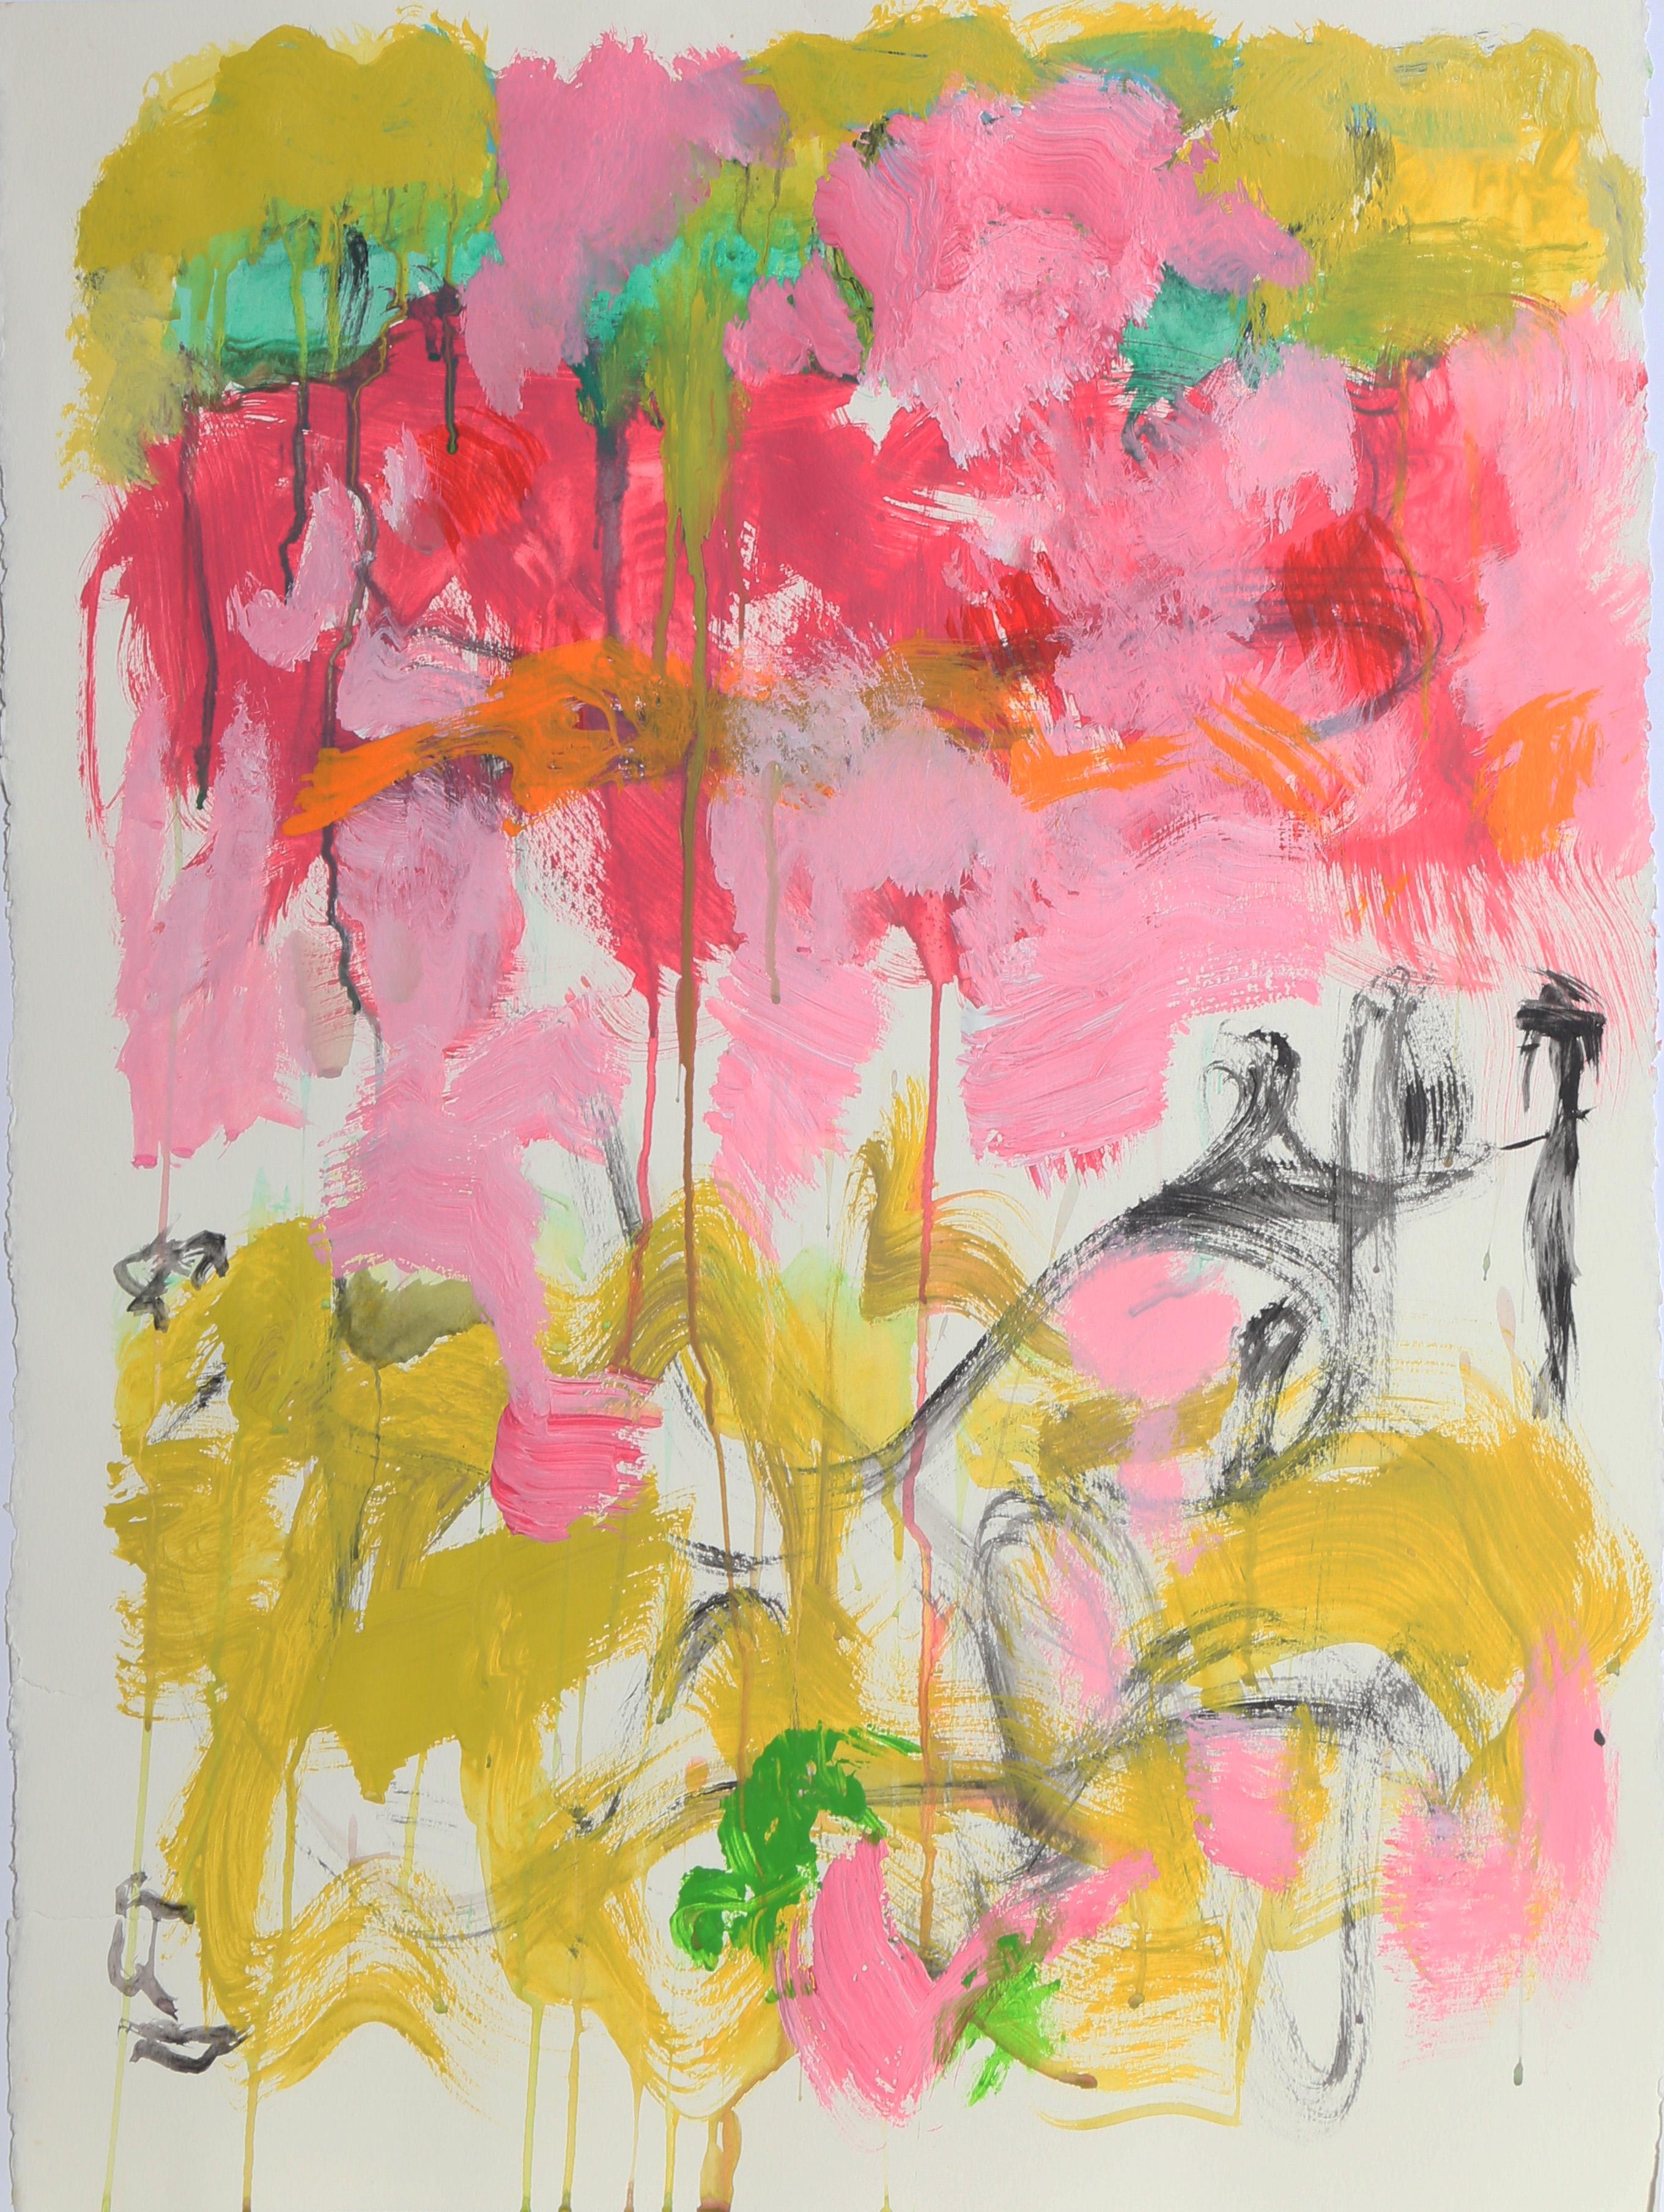 Although pioneered by Jackson Pollock, many artists have taken abstract expressionism and brought it into the contemporary. Gamerov captures movement and color with bold enthusiasm in this painting on paper, choosing to use bright, almost neon tones